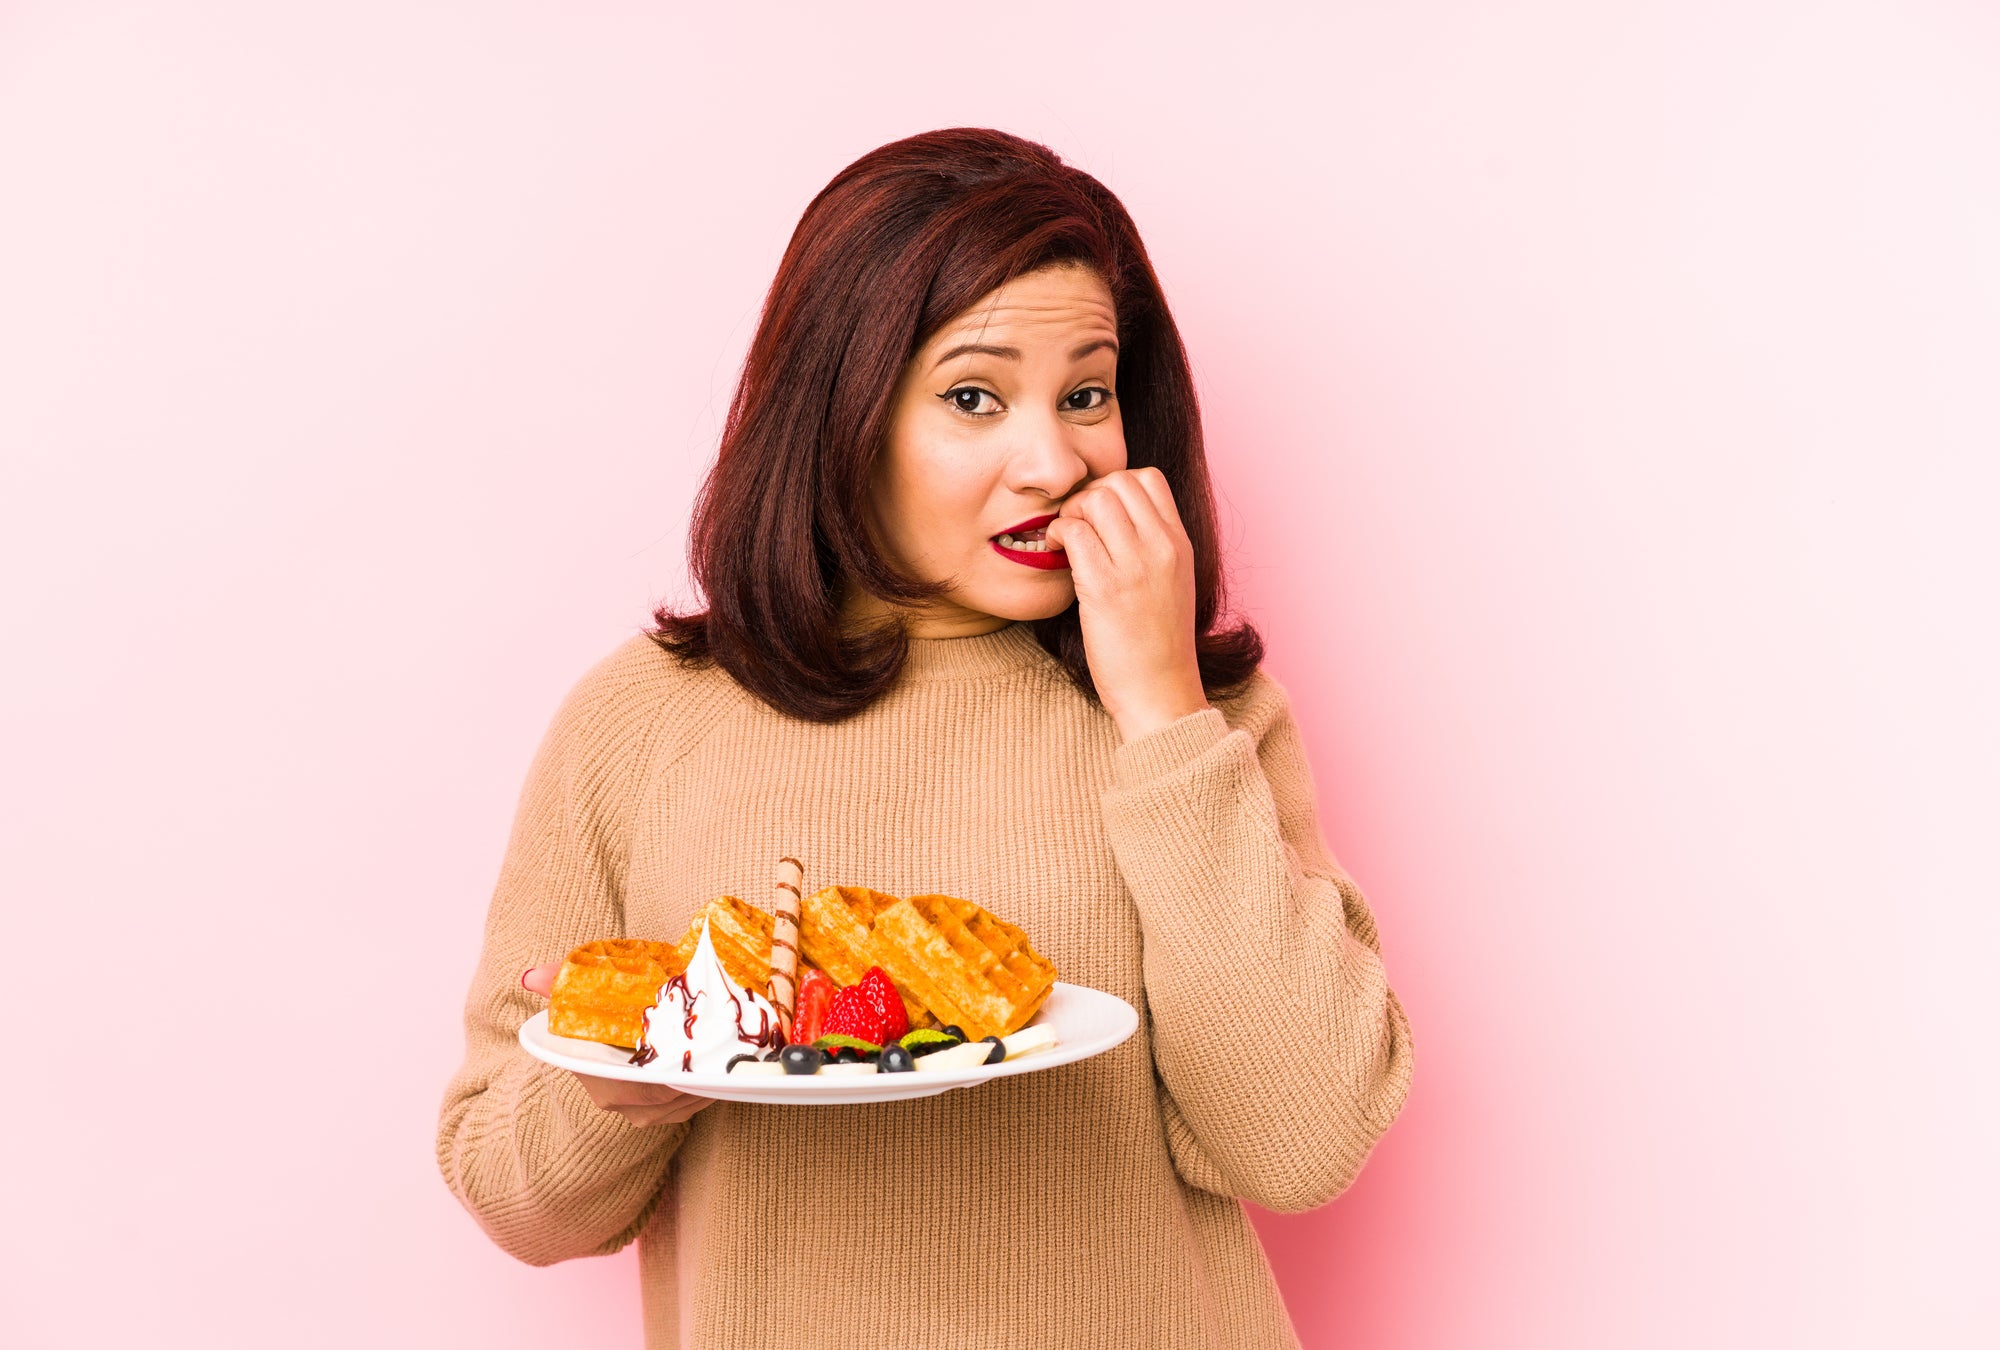 Woman with a plate full of sugary treats trying to decide if she should eat them | Parisians Pure